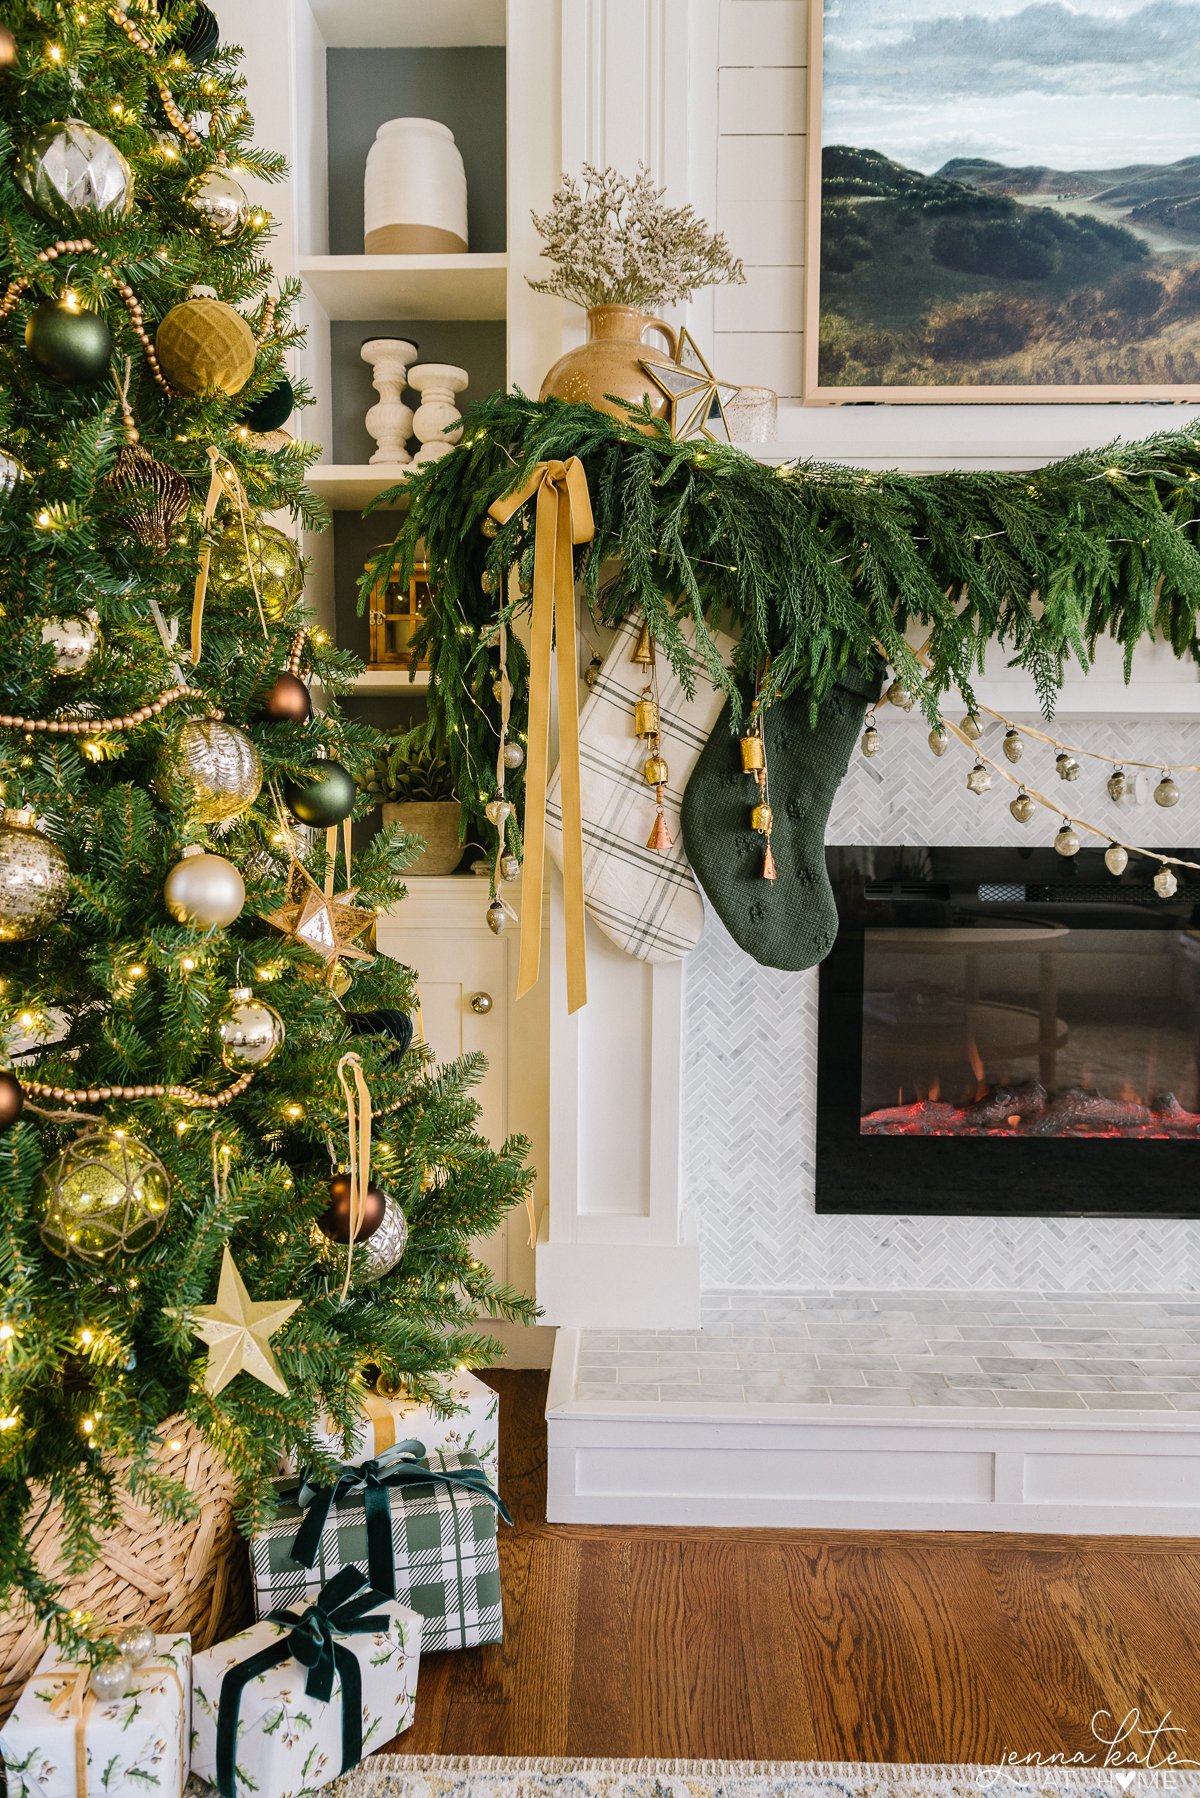 A side view of a fireplace and mantel with a Christmas tree in the corner. Greenery draped down the mantel with a green and white stocking hung.